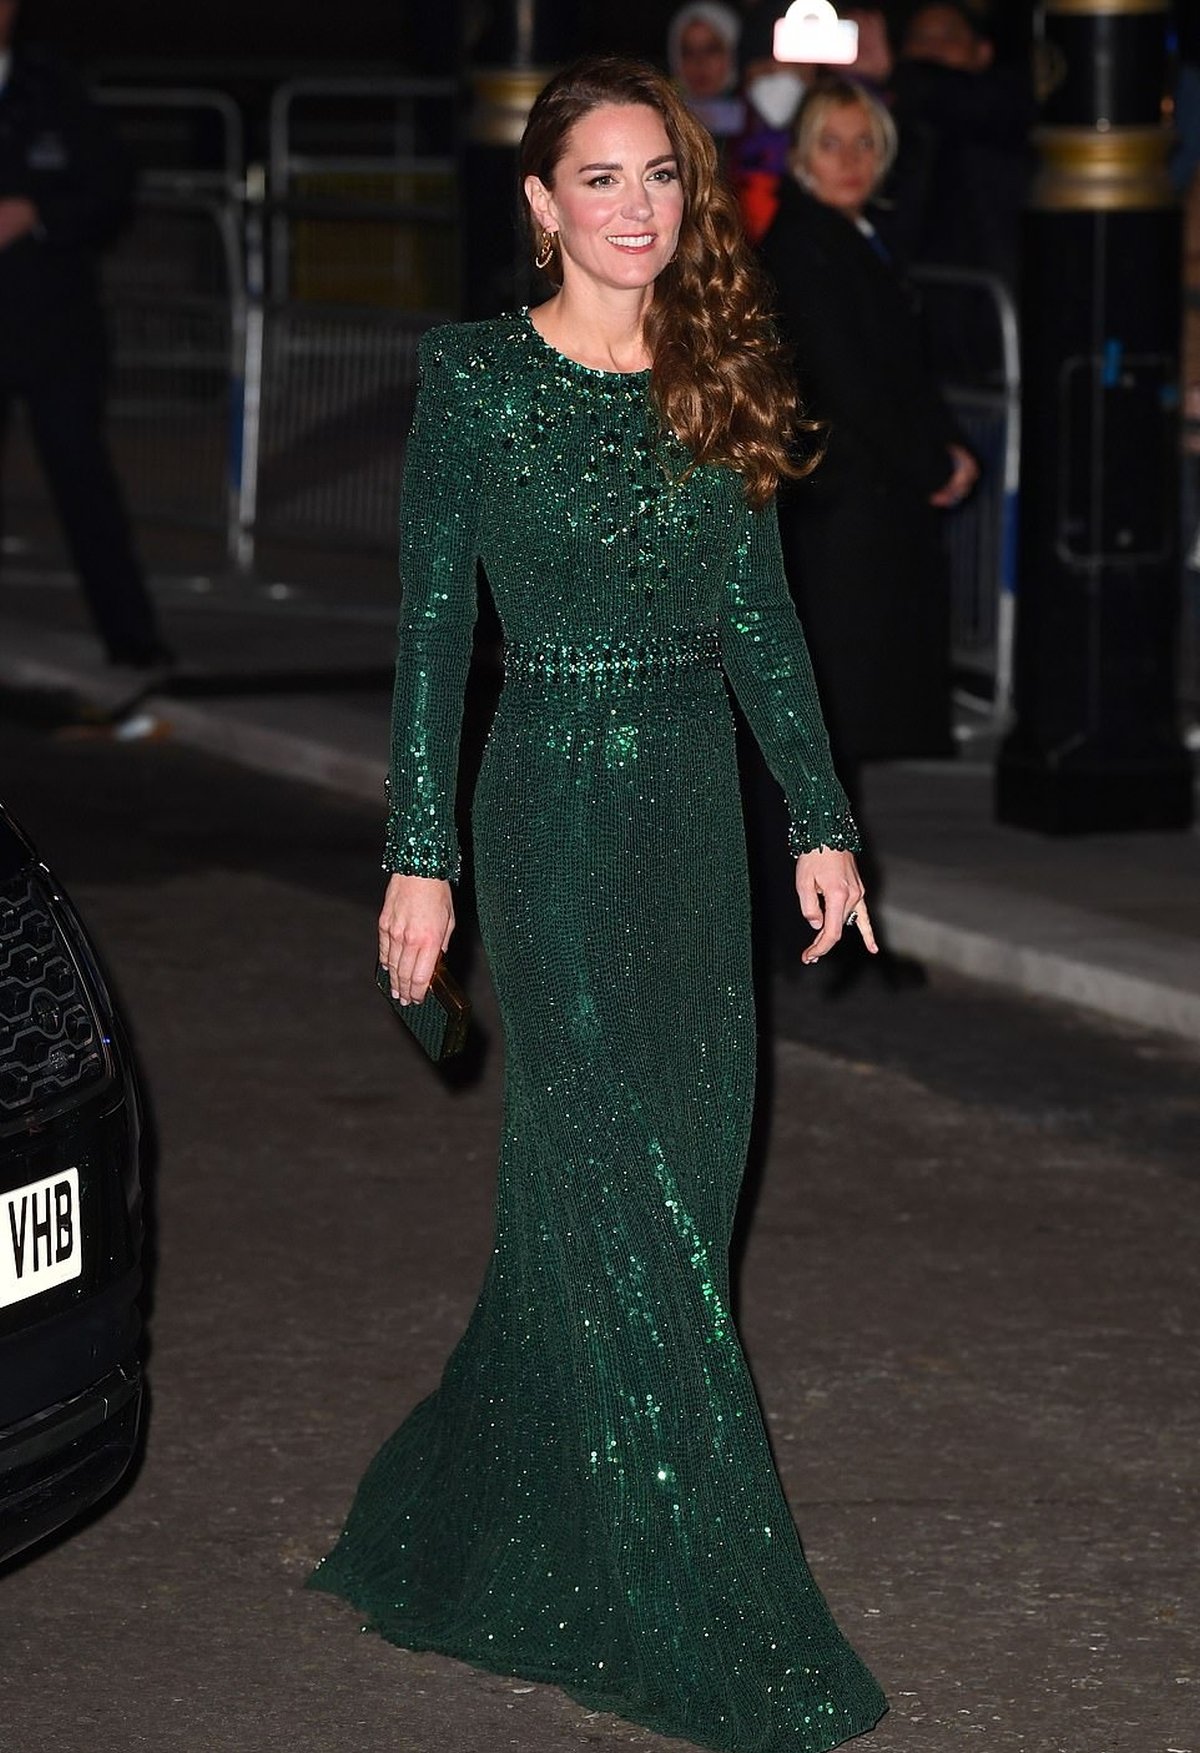 Duchess Catherine in an emerald green dress at a London event